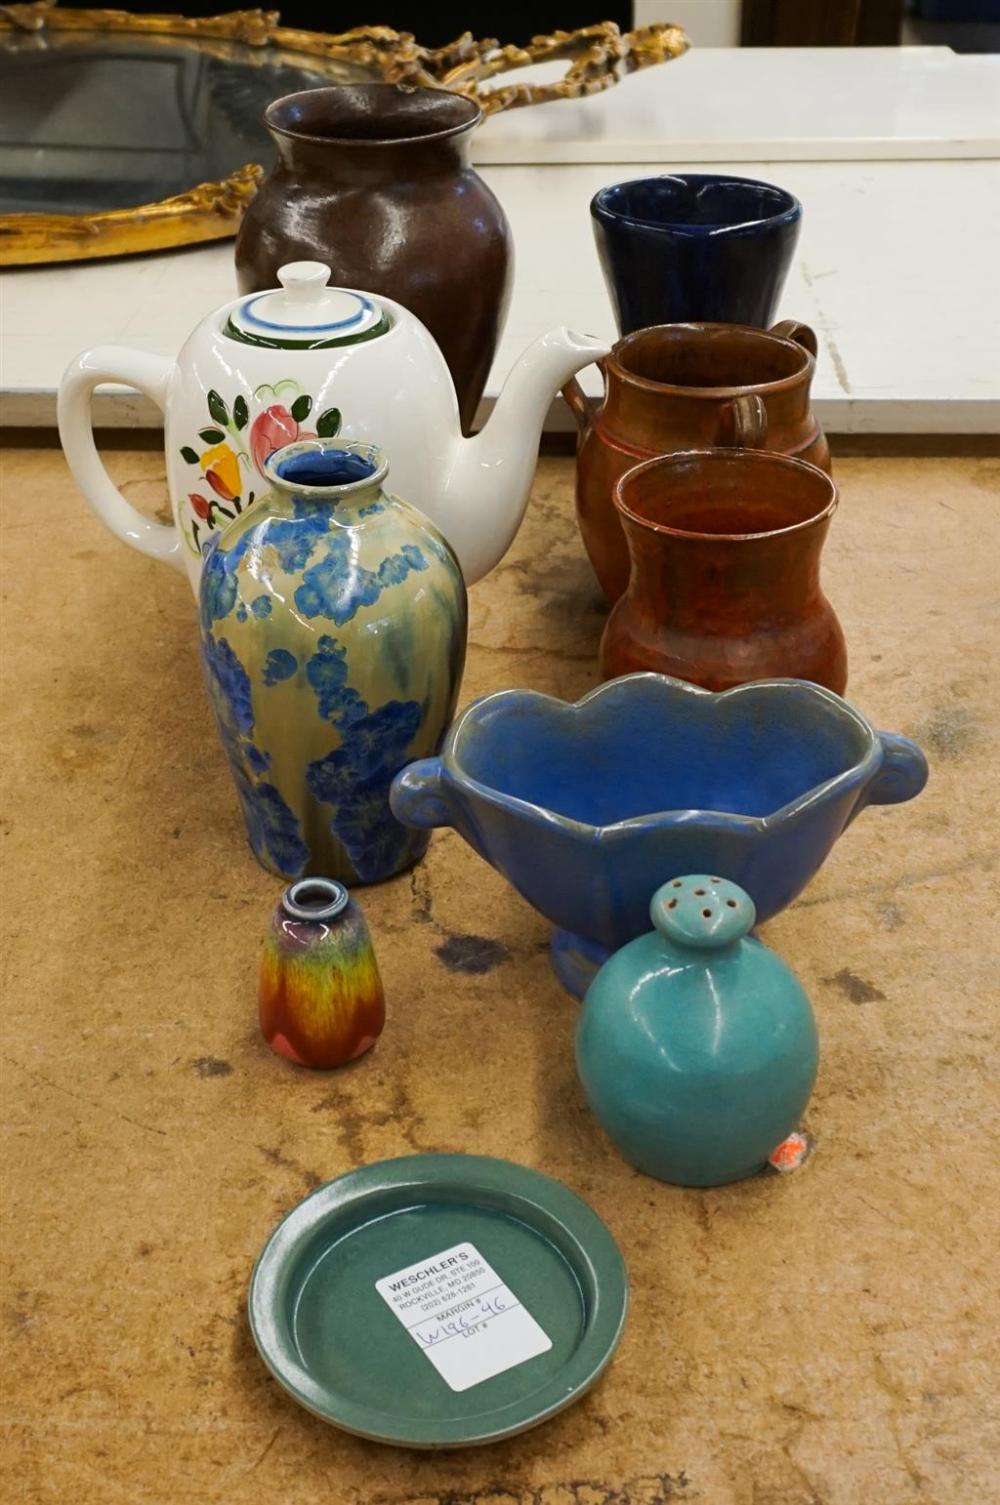 COLLECTION OF ART POTTERY TABLE